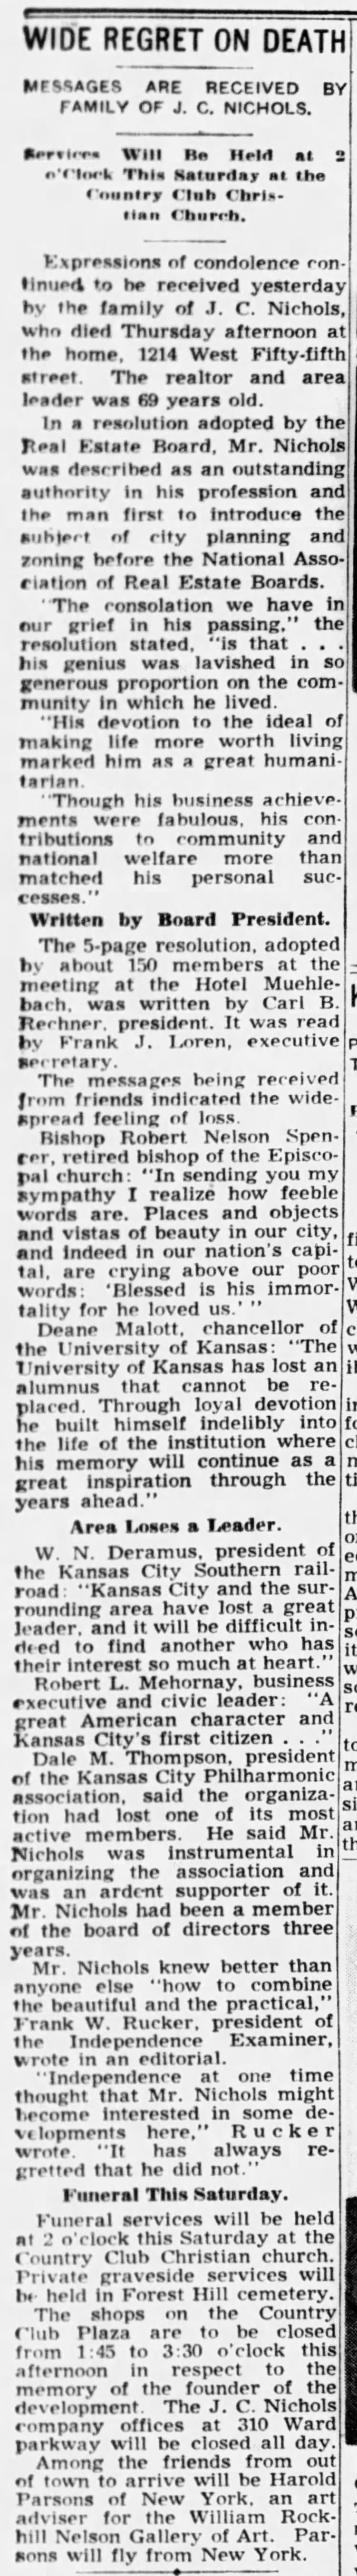 Wide Regret on Death; 18 Feb 1950; The Kansas City Times; 3